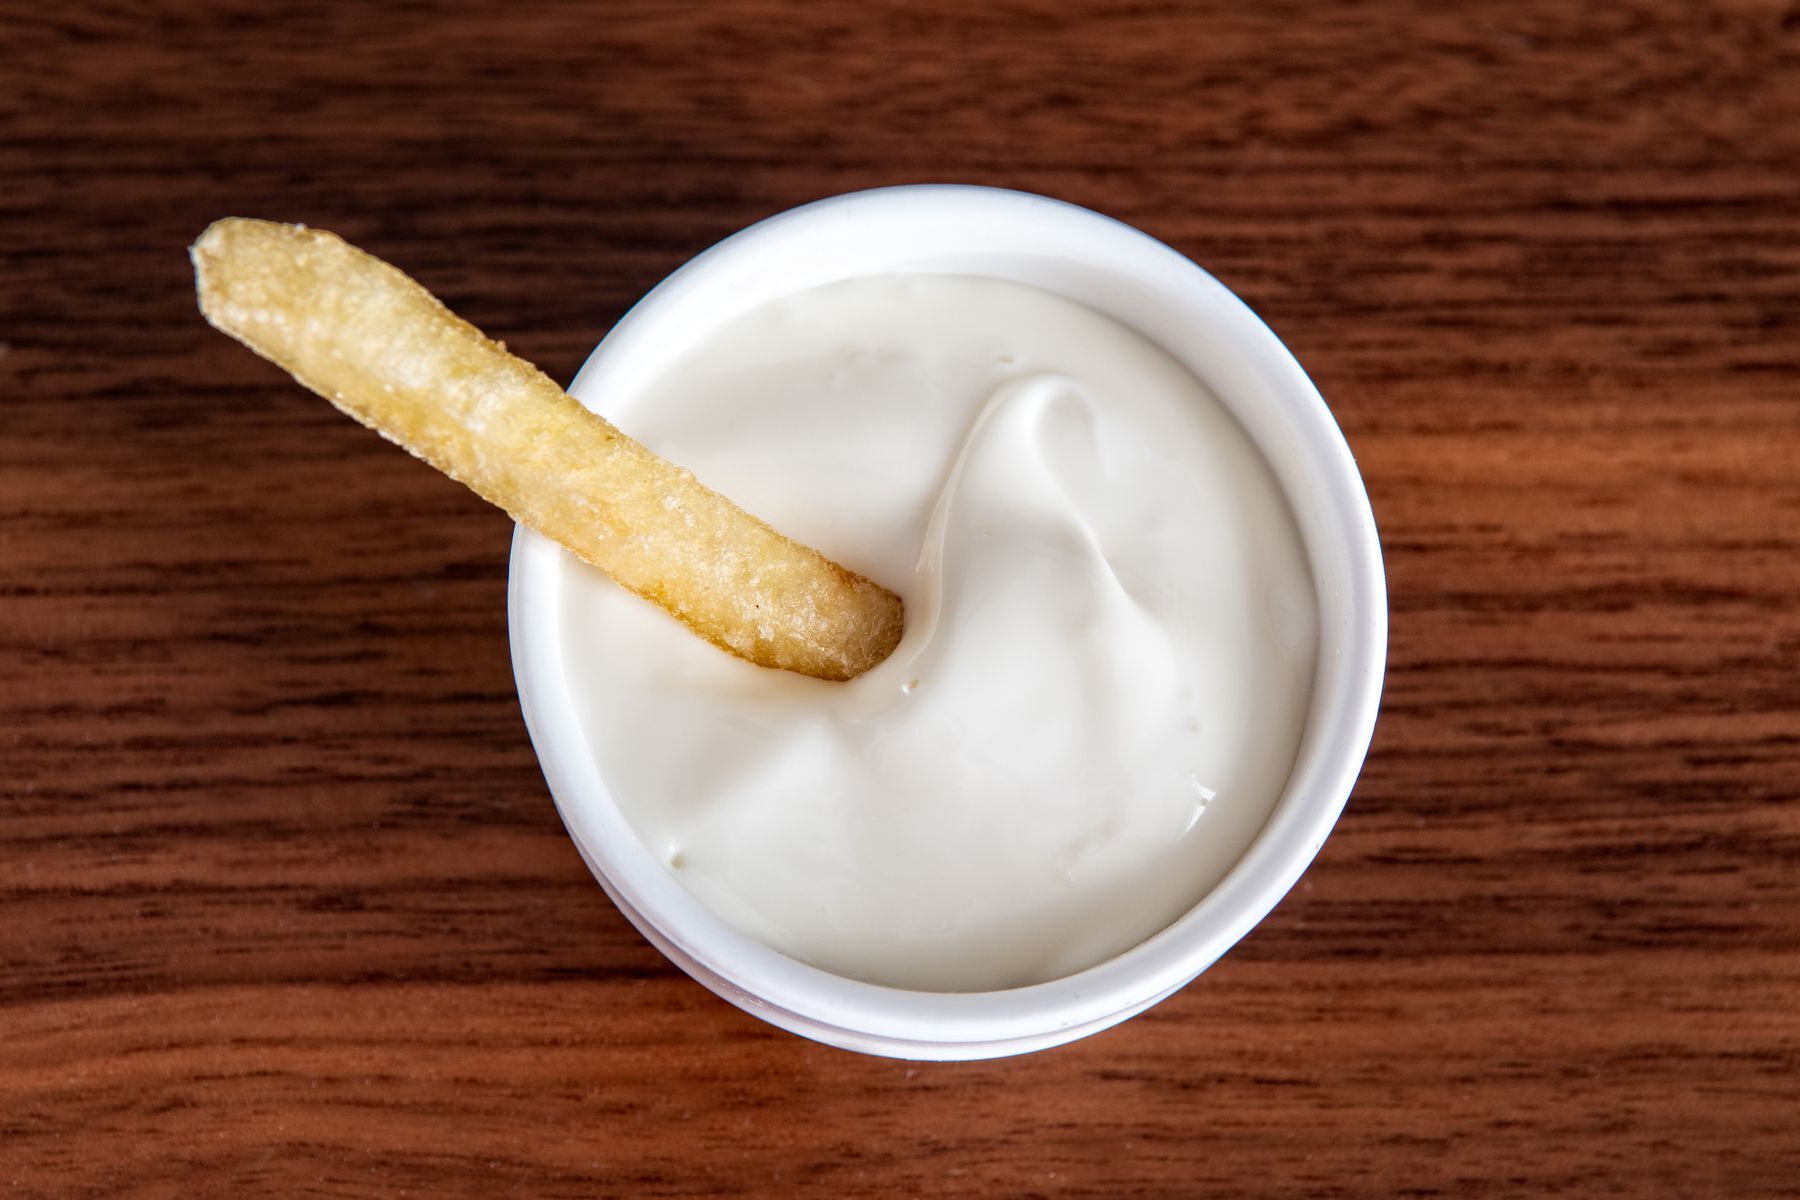 <p>It’s hard to know where this delicious tradition originated, but Wendy’s fast-food chain has made <a href="https://www.thrillist.com/eat/nation/french-fries-wendys-ice-cream-frosty-recipe-science">fries dipped in a milkshake</a> its trademark treat!</p>